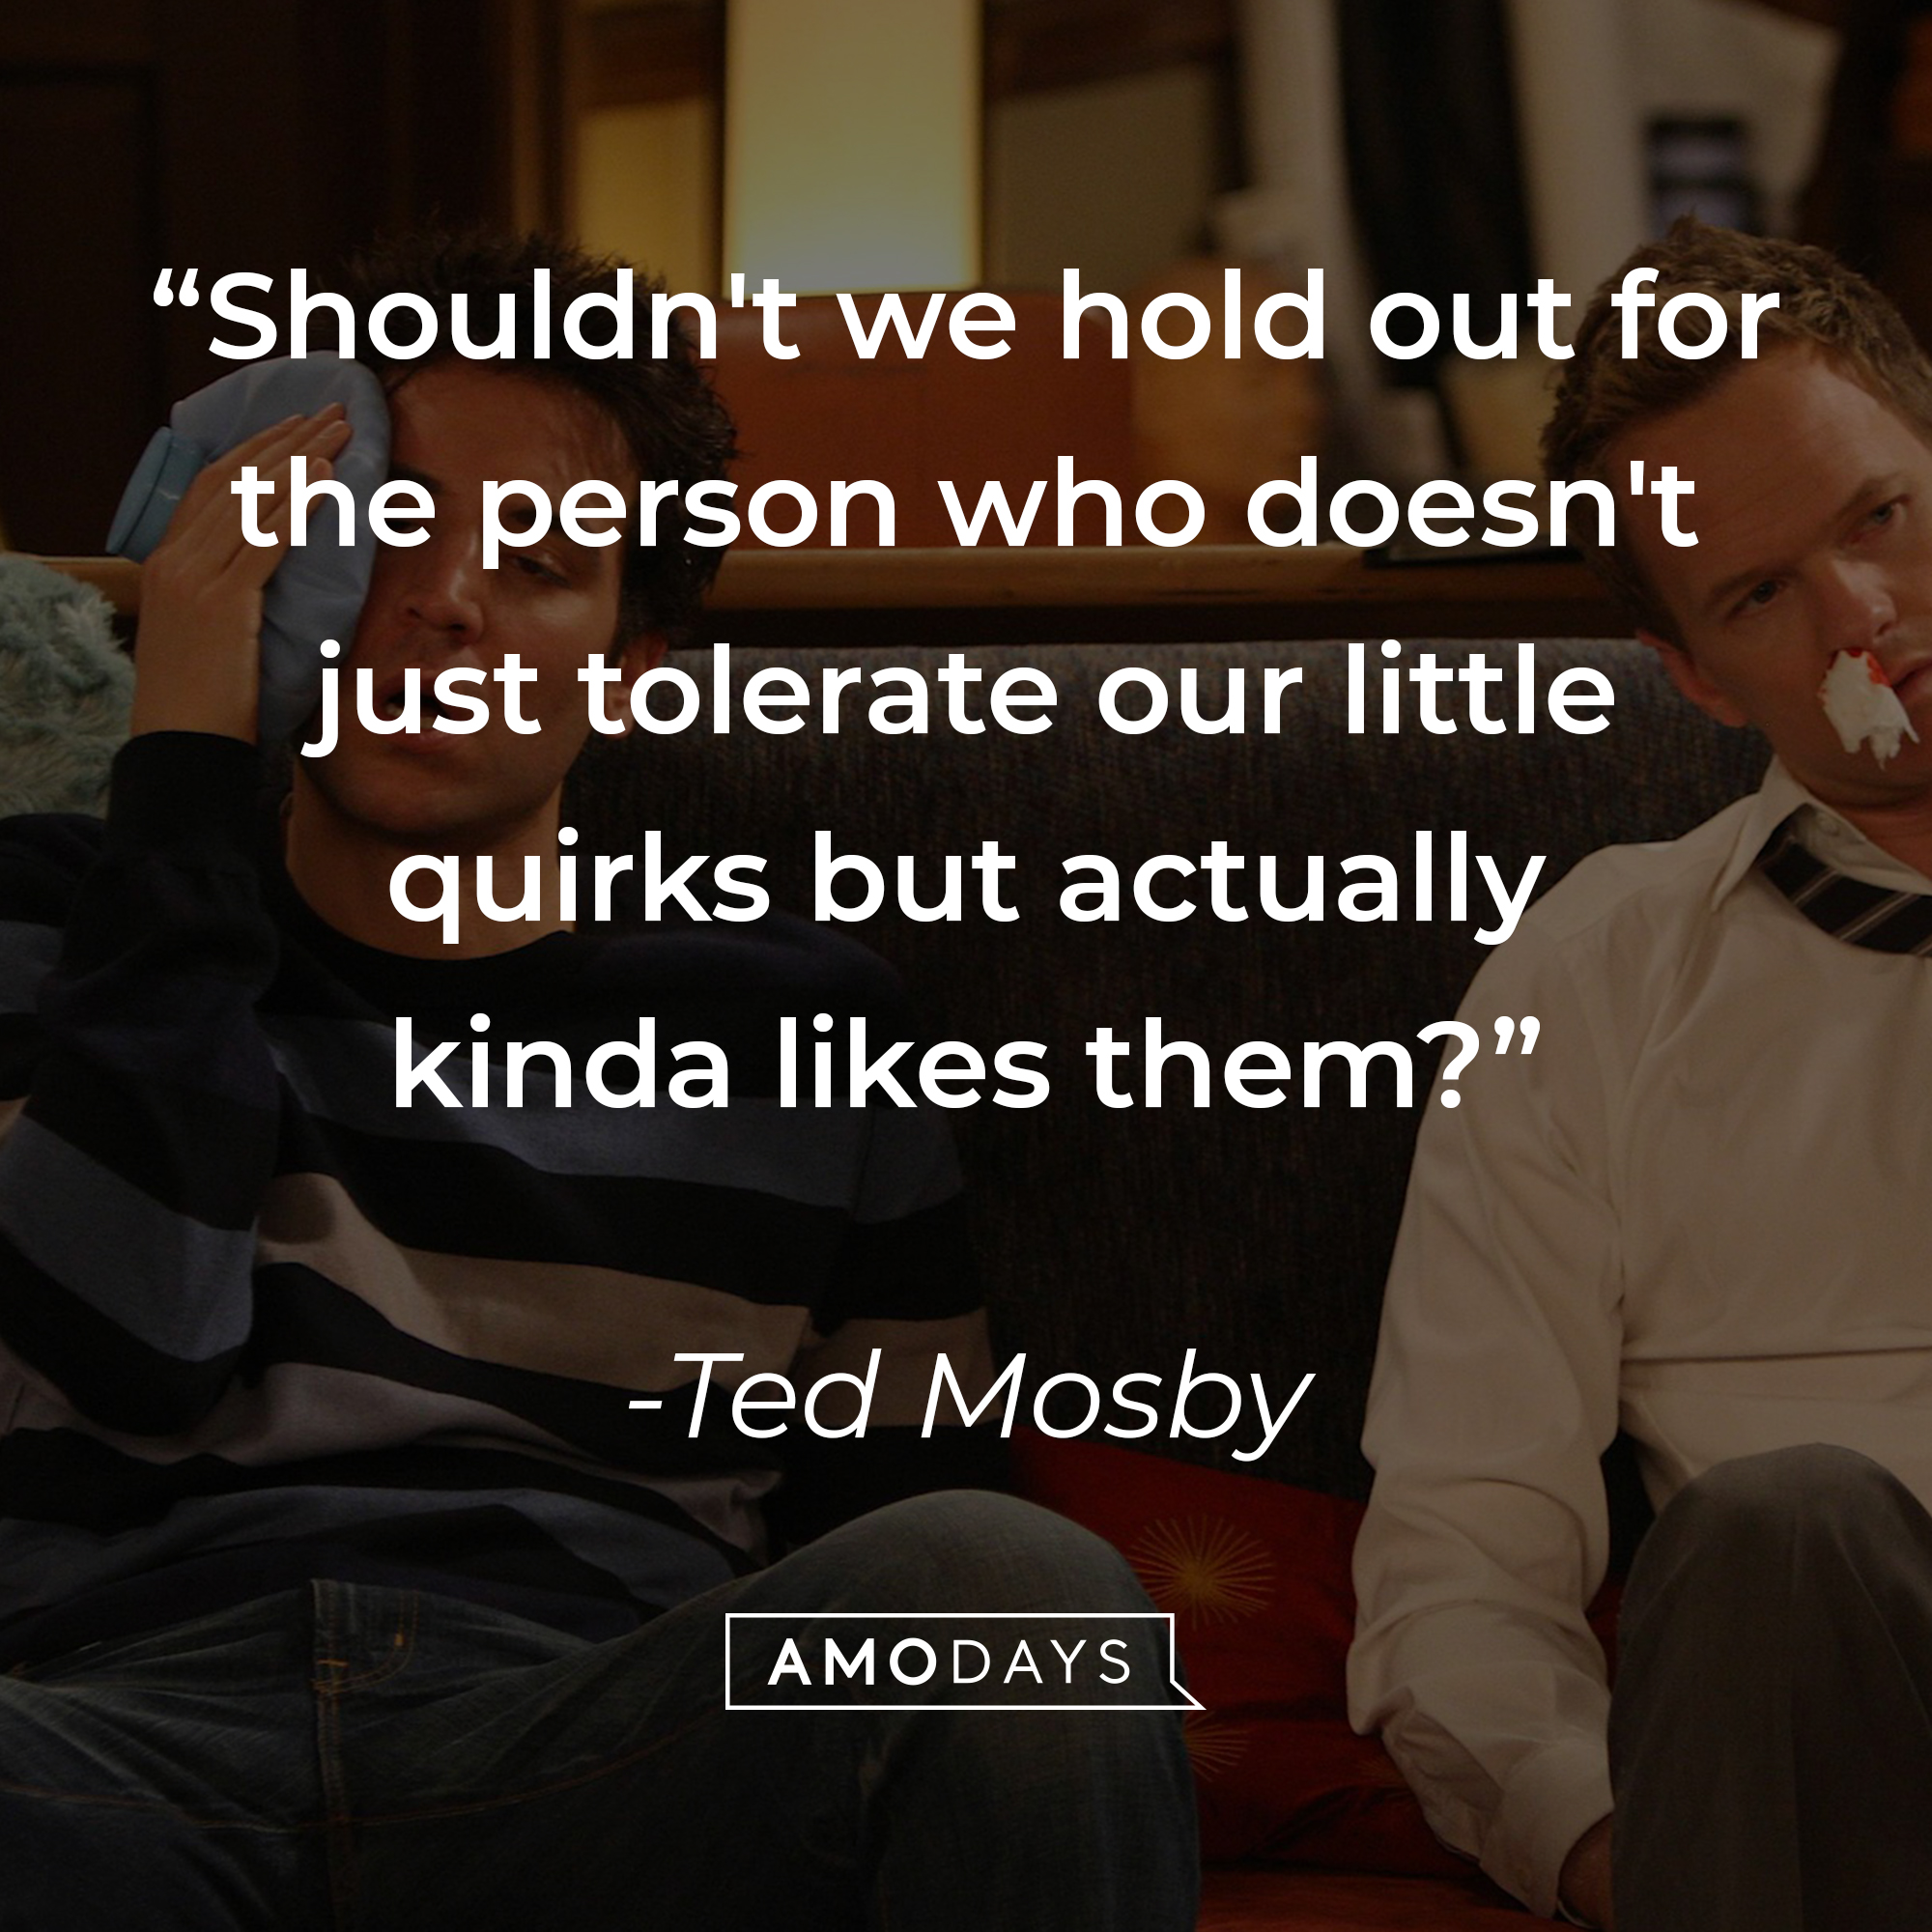 Ted Mosby's quote: “Shouldn't we hold out for the person who doesn't just tolerate our little quirks but actually kinda likes them?” | Source: facebook.com/OfficialHowIMetYourMother